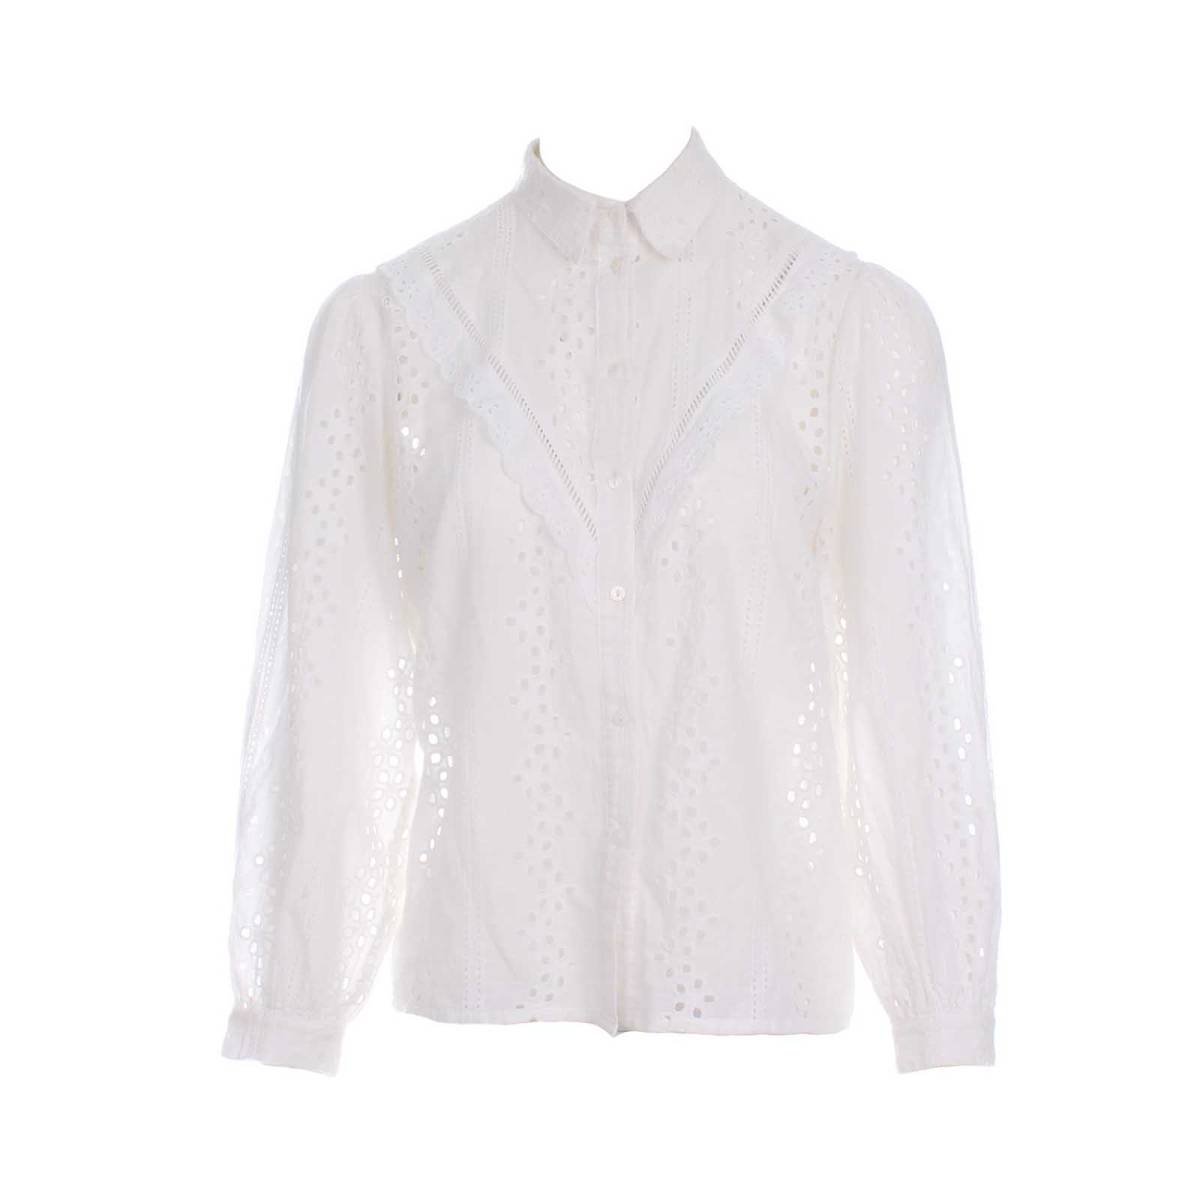 Xoemay blouse embroidery white Aimee